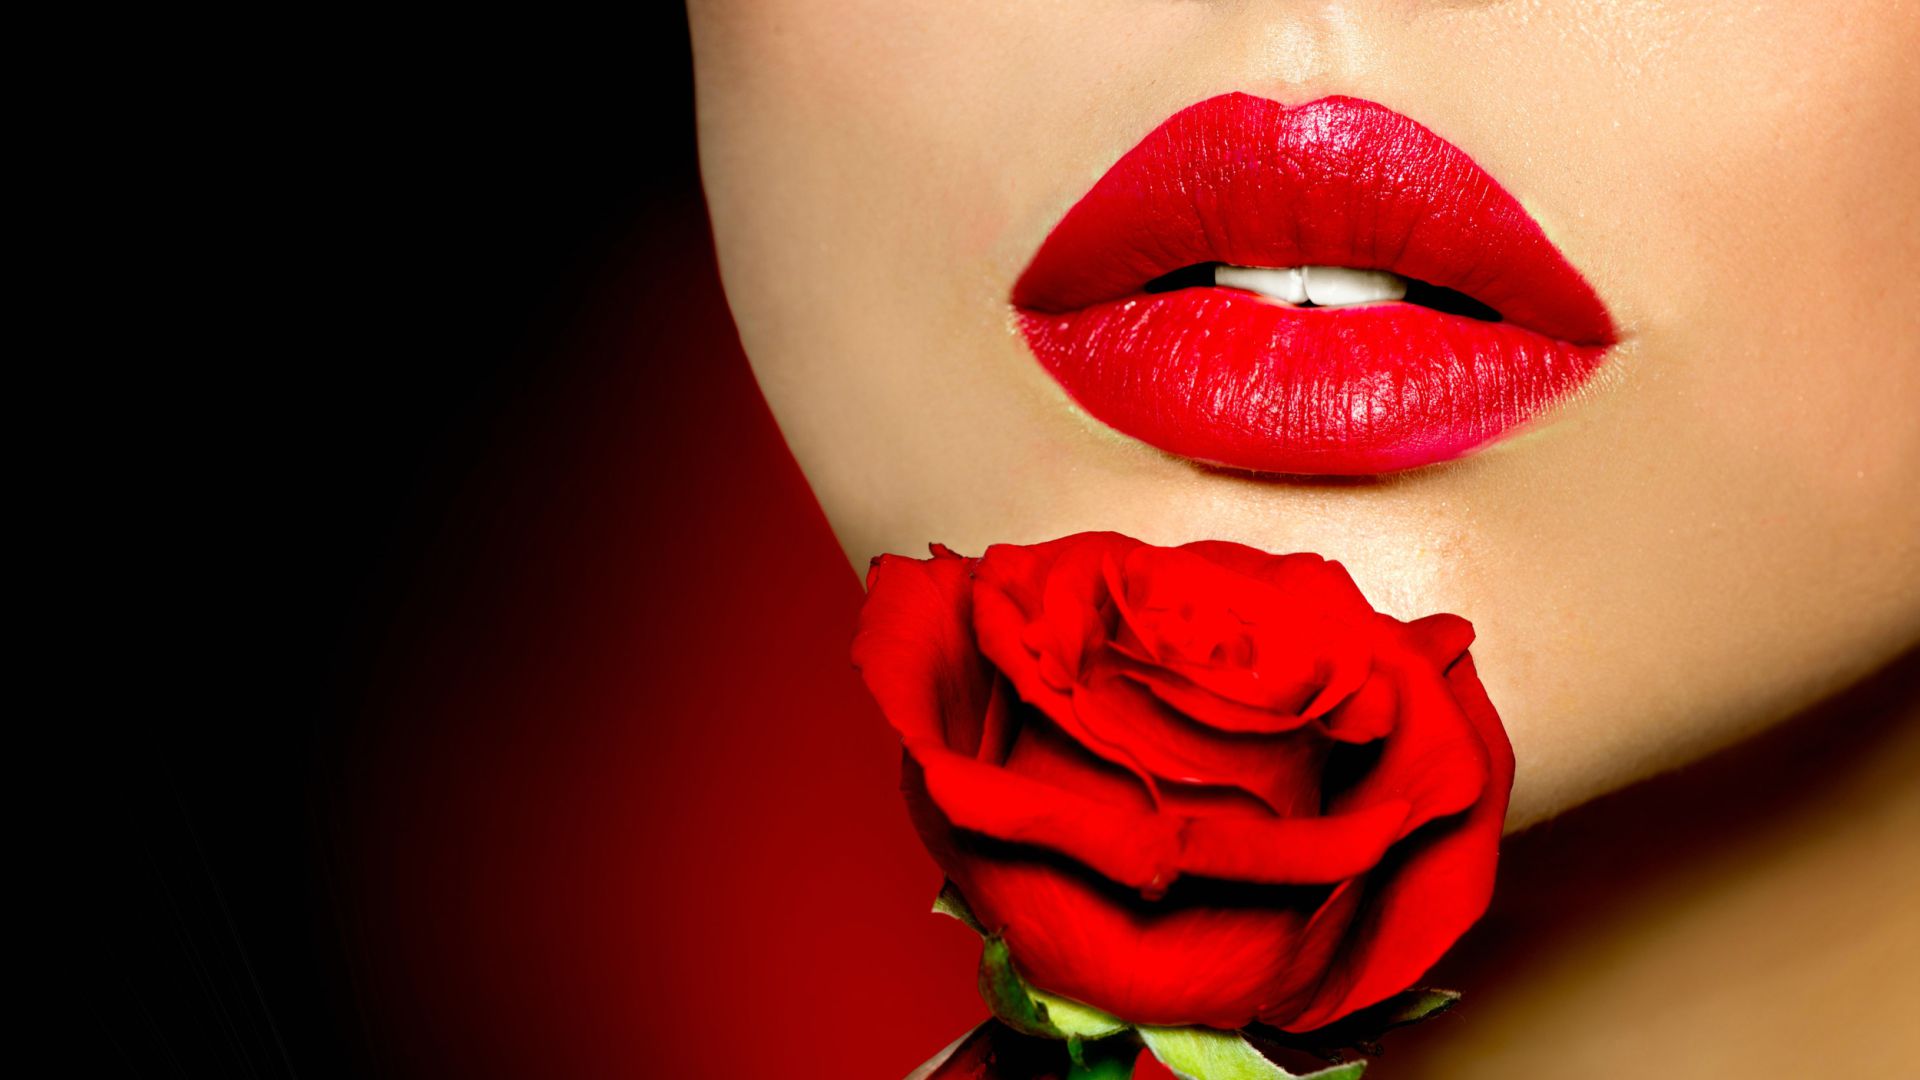 romantic free 4k background wallpaperss hd red rose with red lips